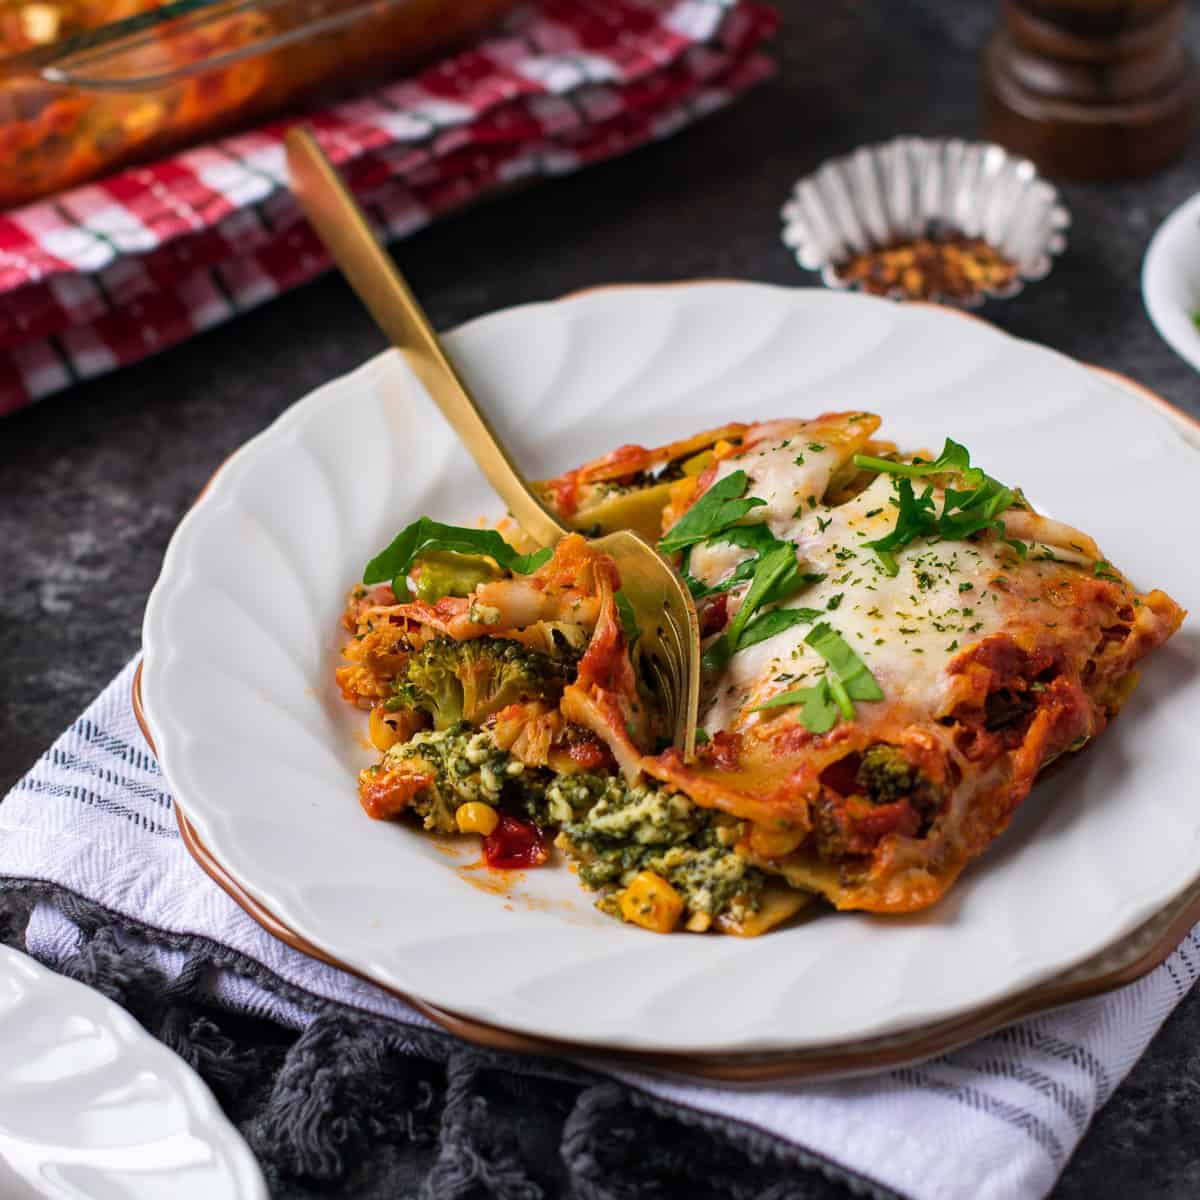 Veg lasagna served on a white plate with a fork